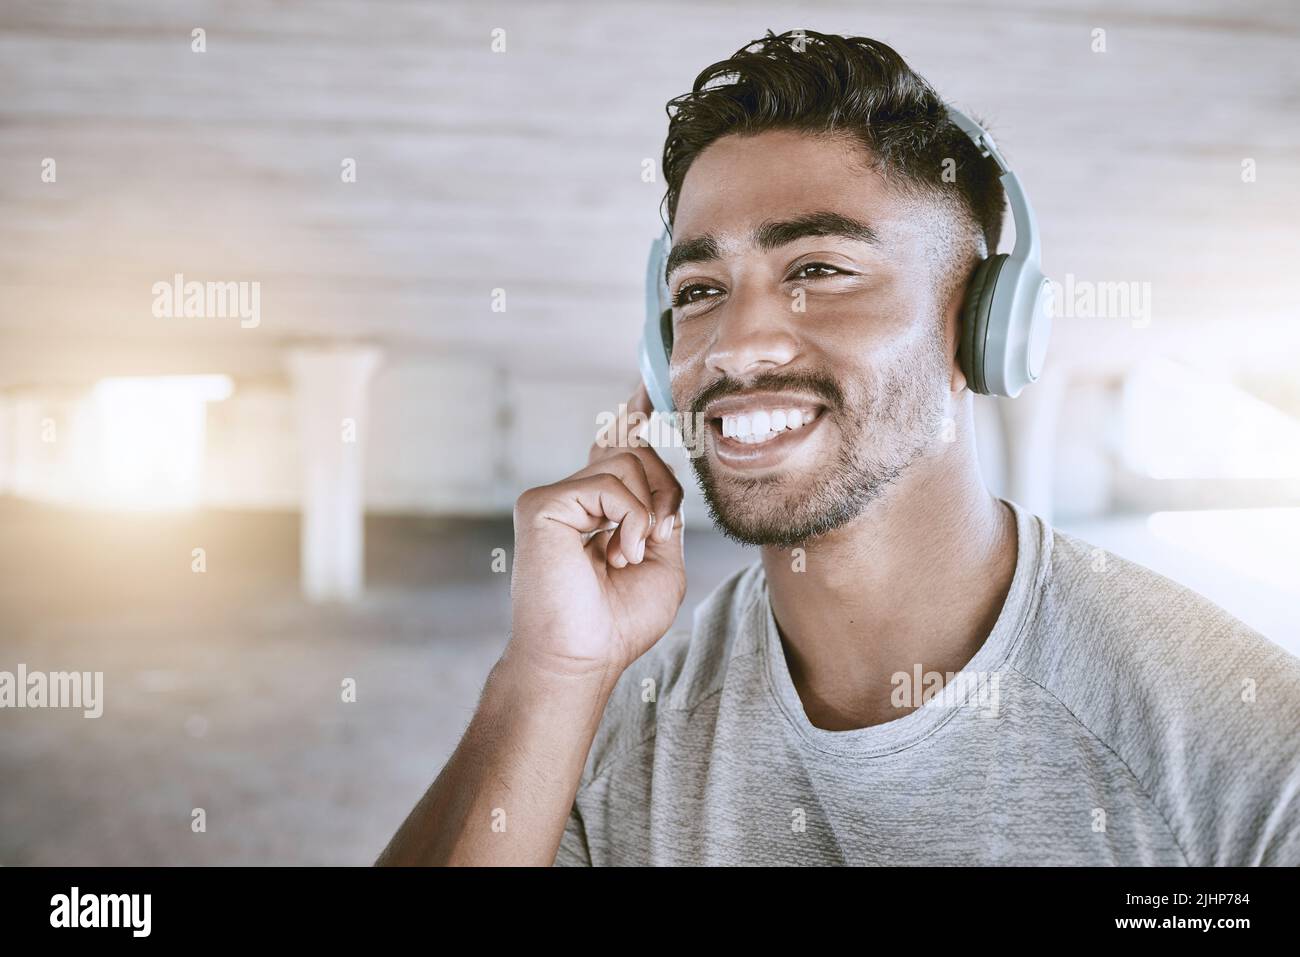 Fit young man listening to music through headphones while exercising outdoors. Taking a break from his workout and run Stock Photo